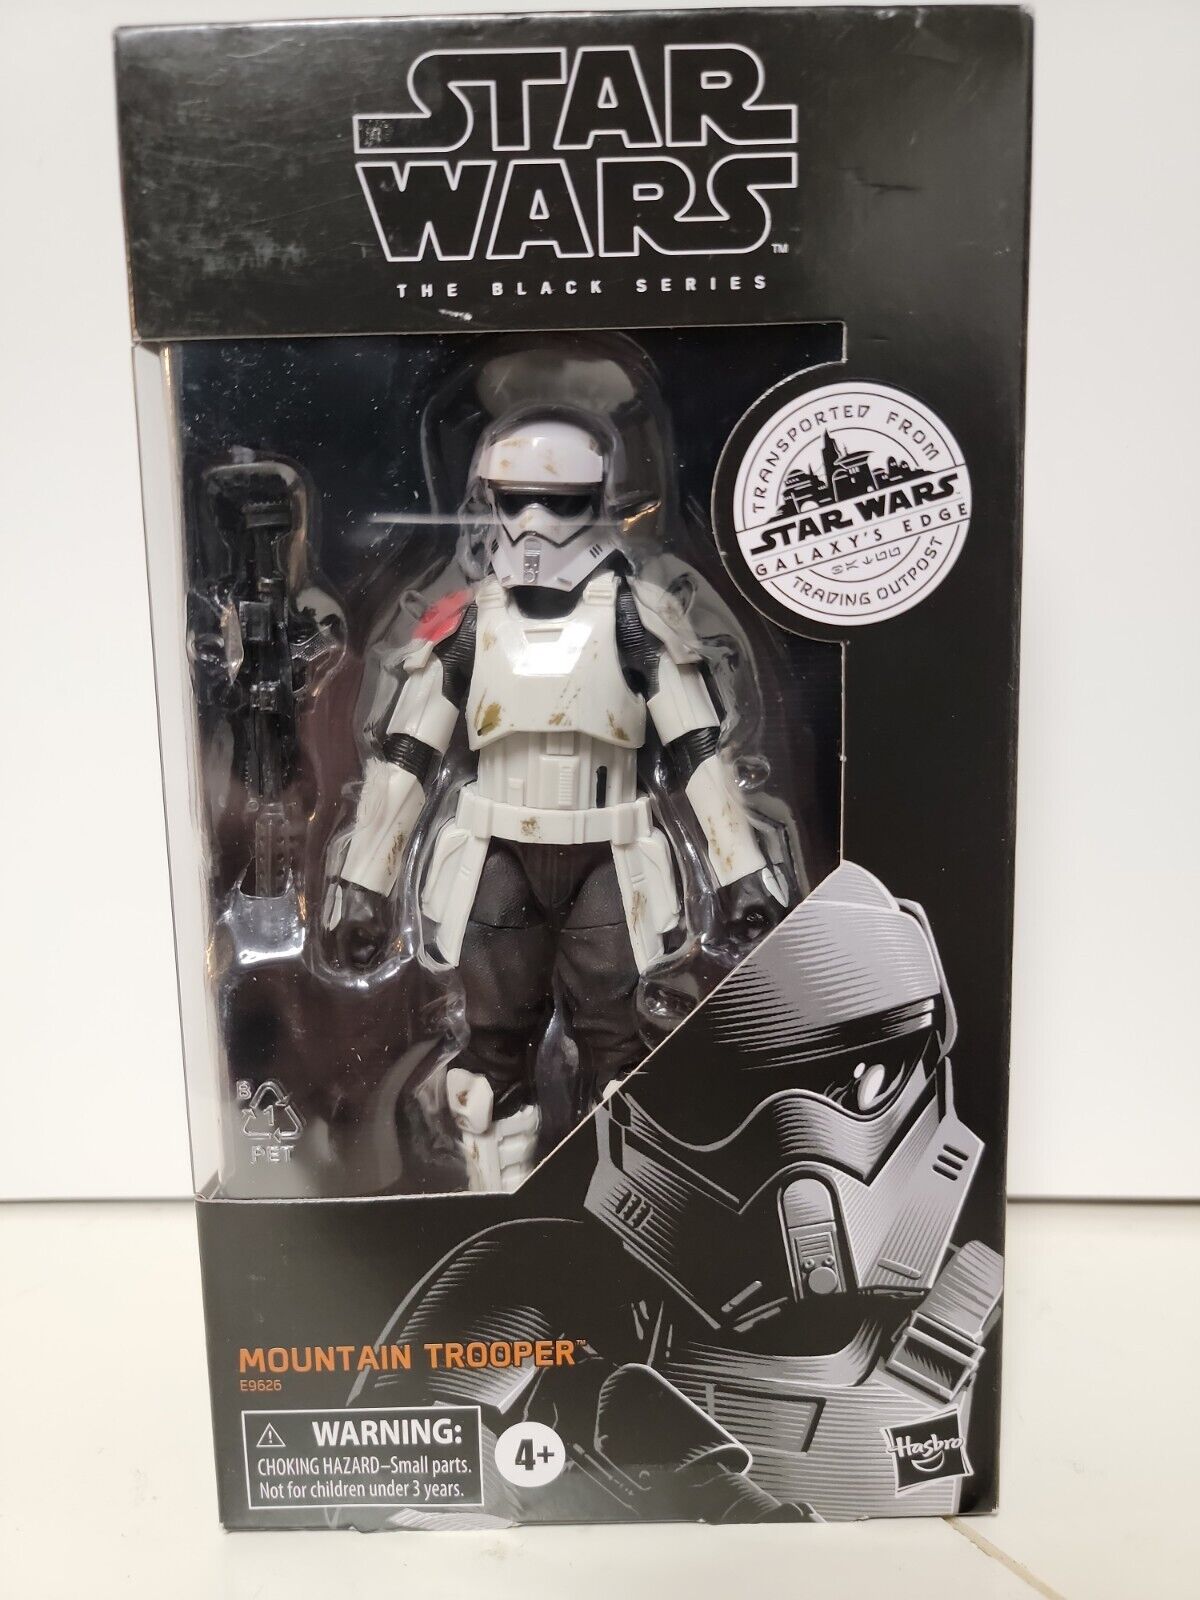 Star Wars The Black Series Mountain Trooper 6" Action Figure Galaxy's Edge